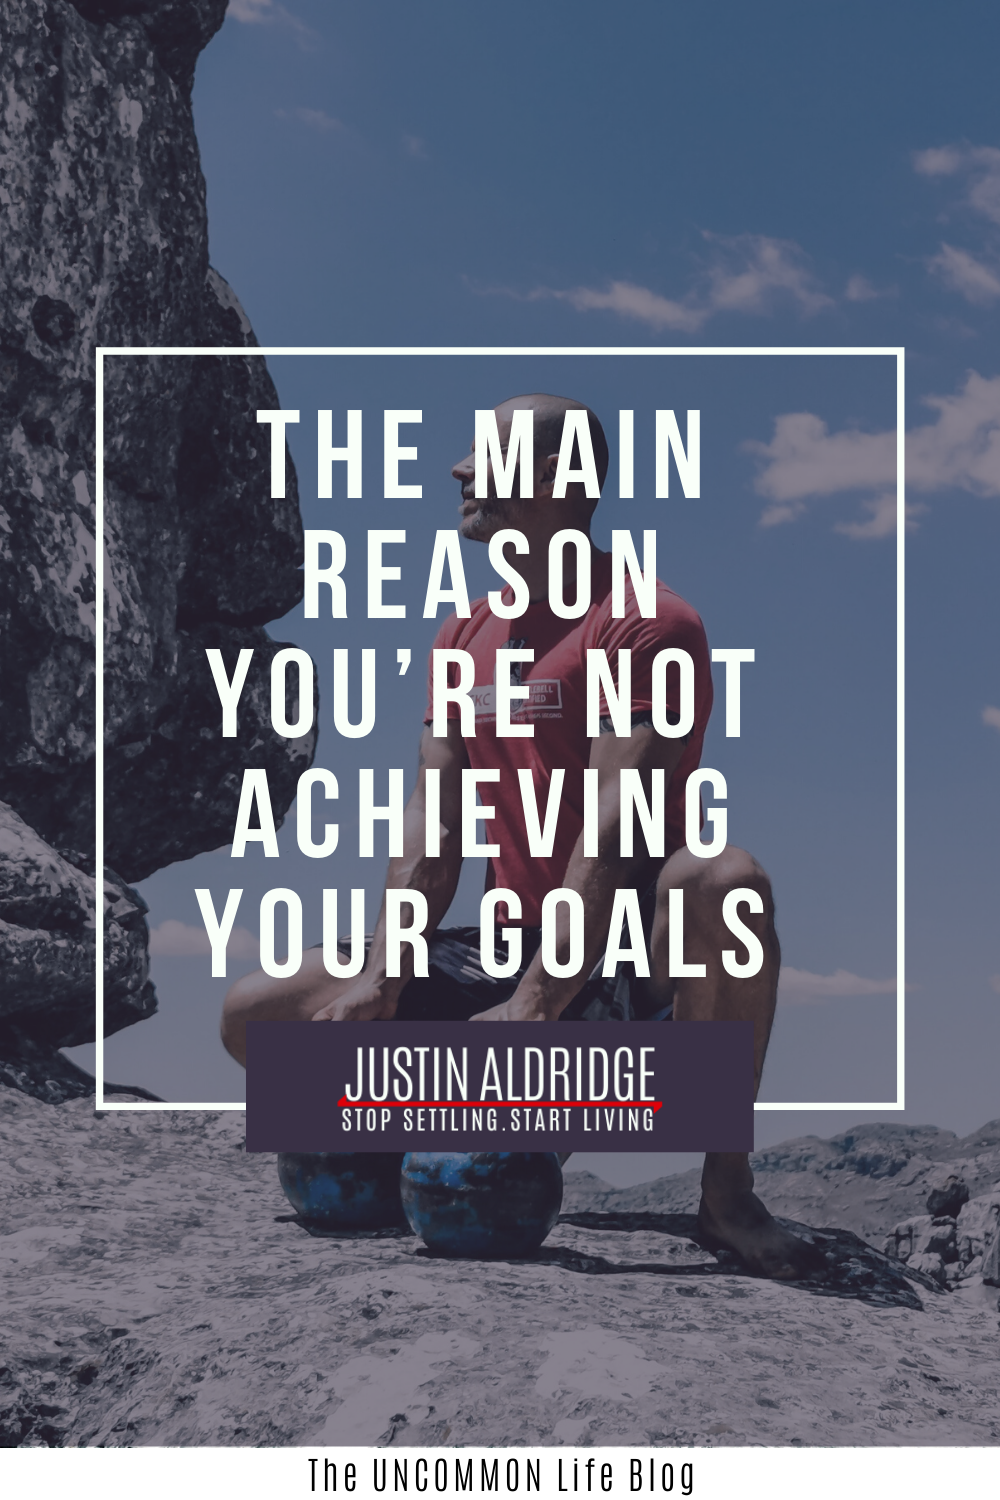 Man on a cliff squatting down in the background behind the text, "The main reason you're not achieving your goals" in white font.